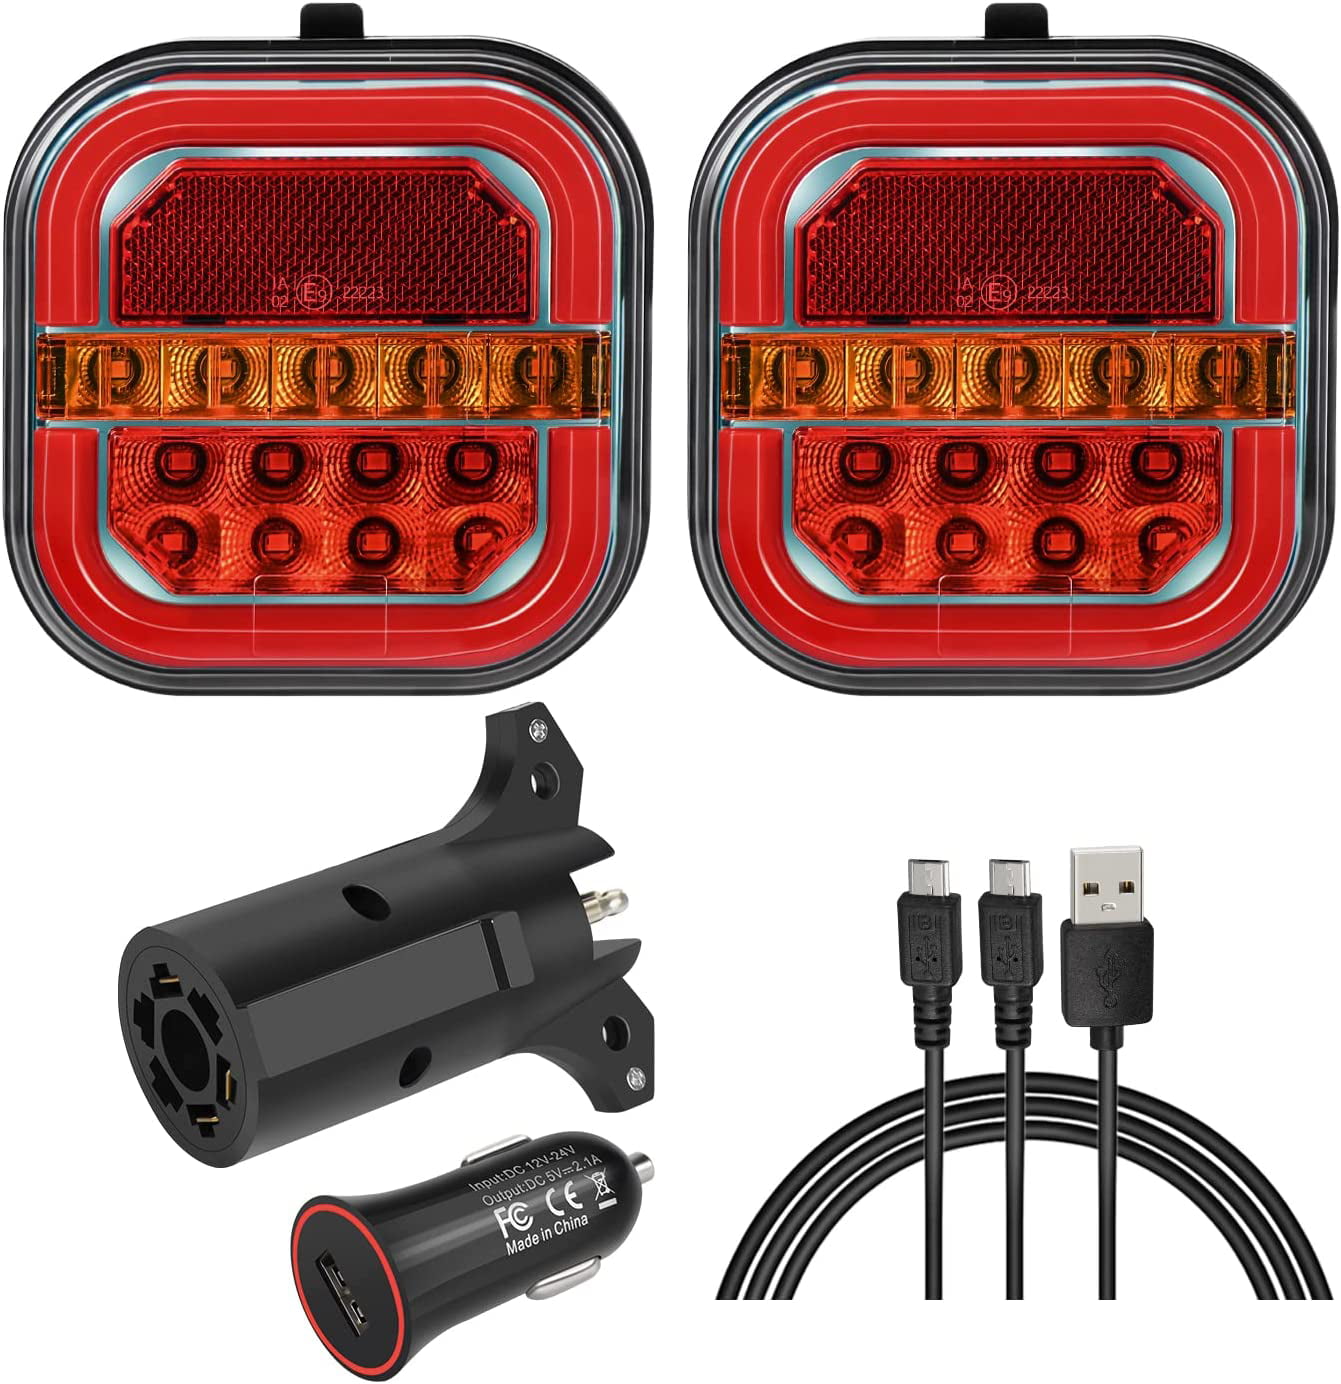 Weather-Proof Trailer Plug 24V to 12V Transformer LED Tow Lights with Magnetic Base- 30' Cable 